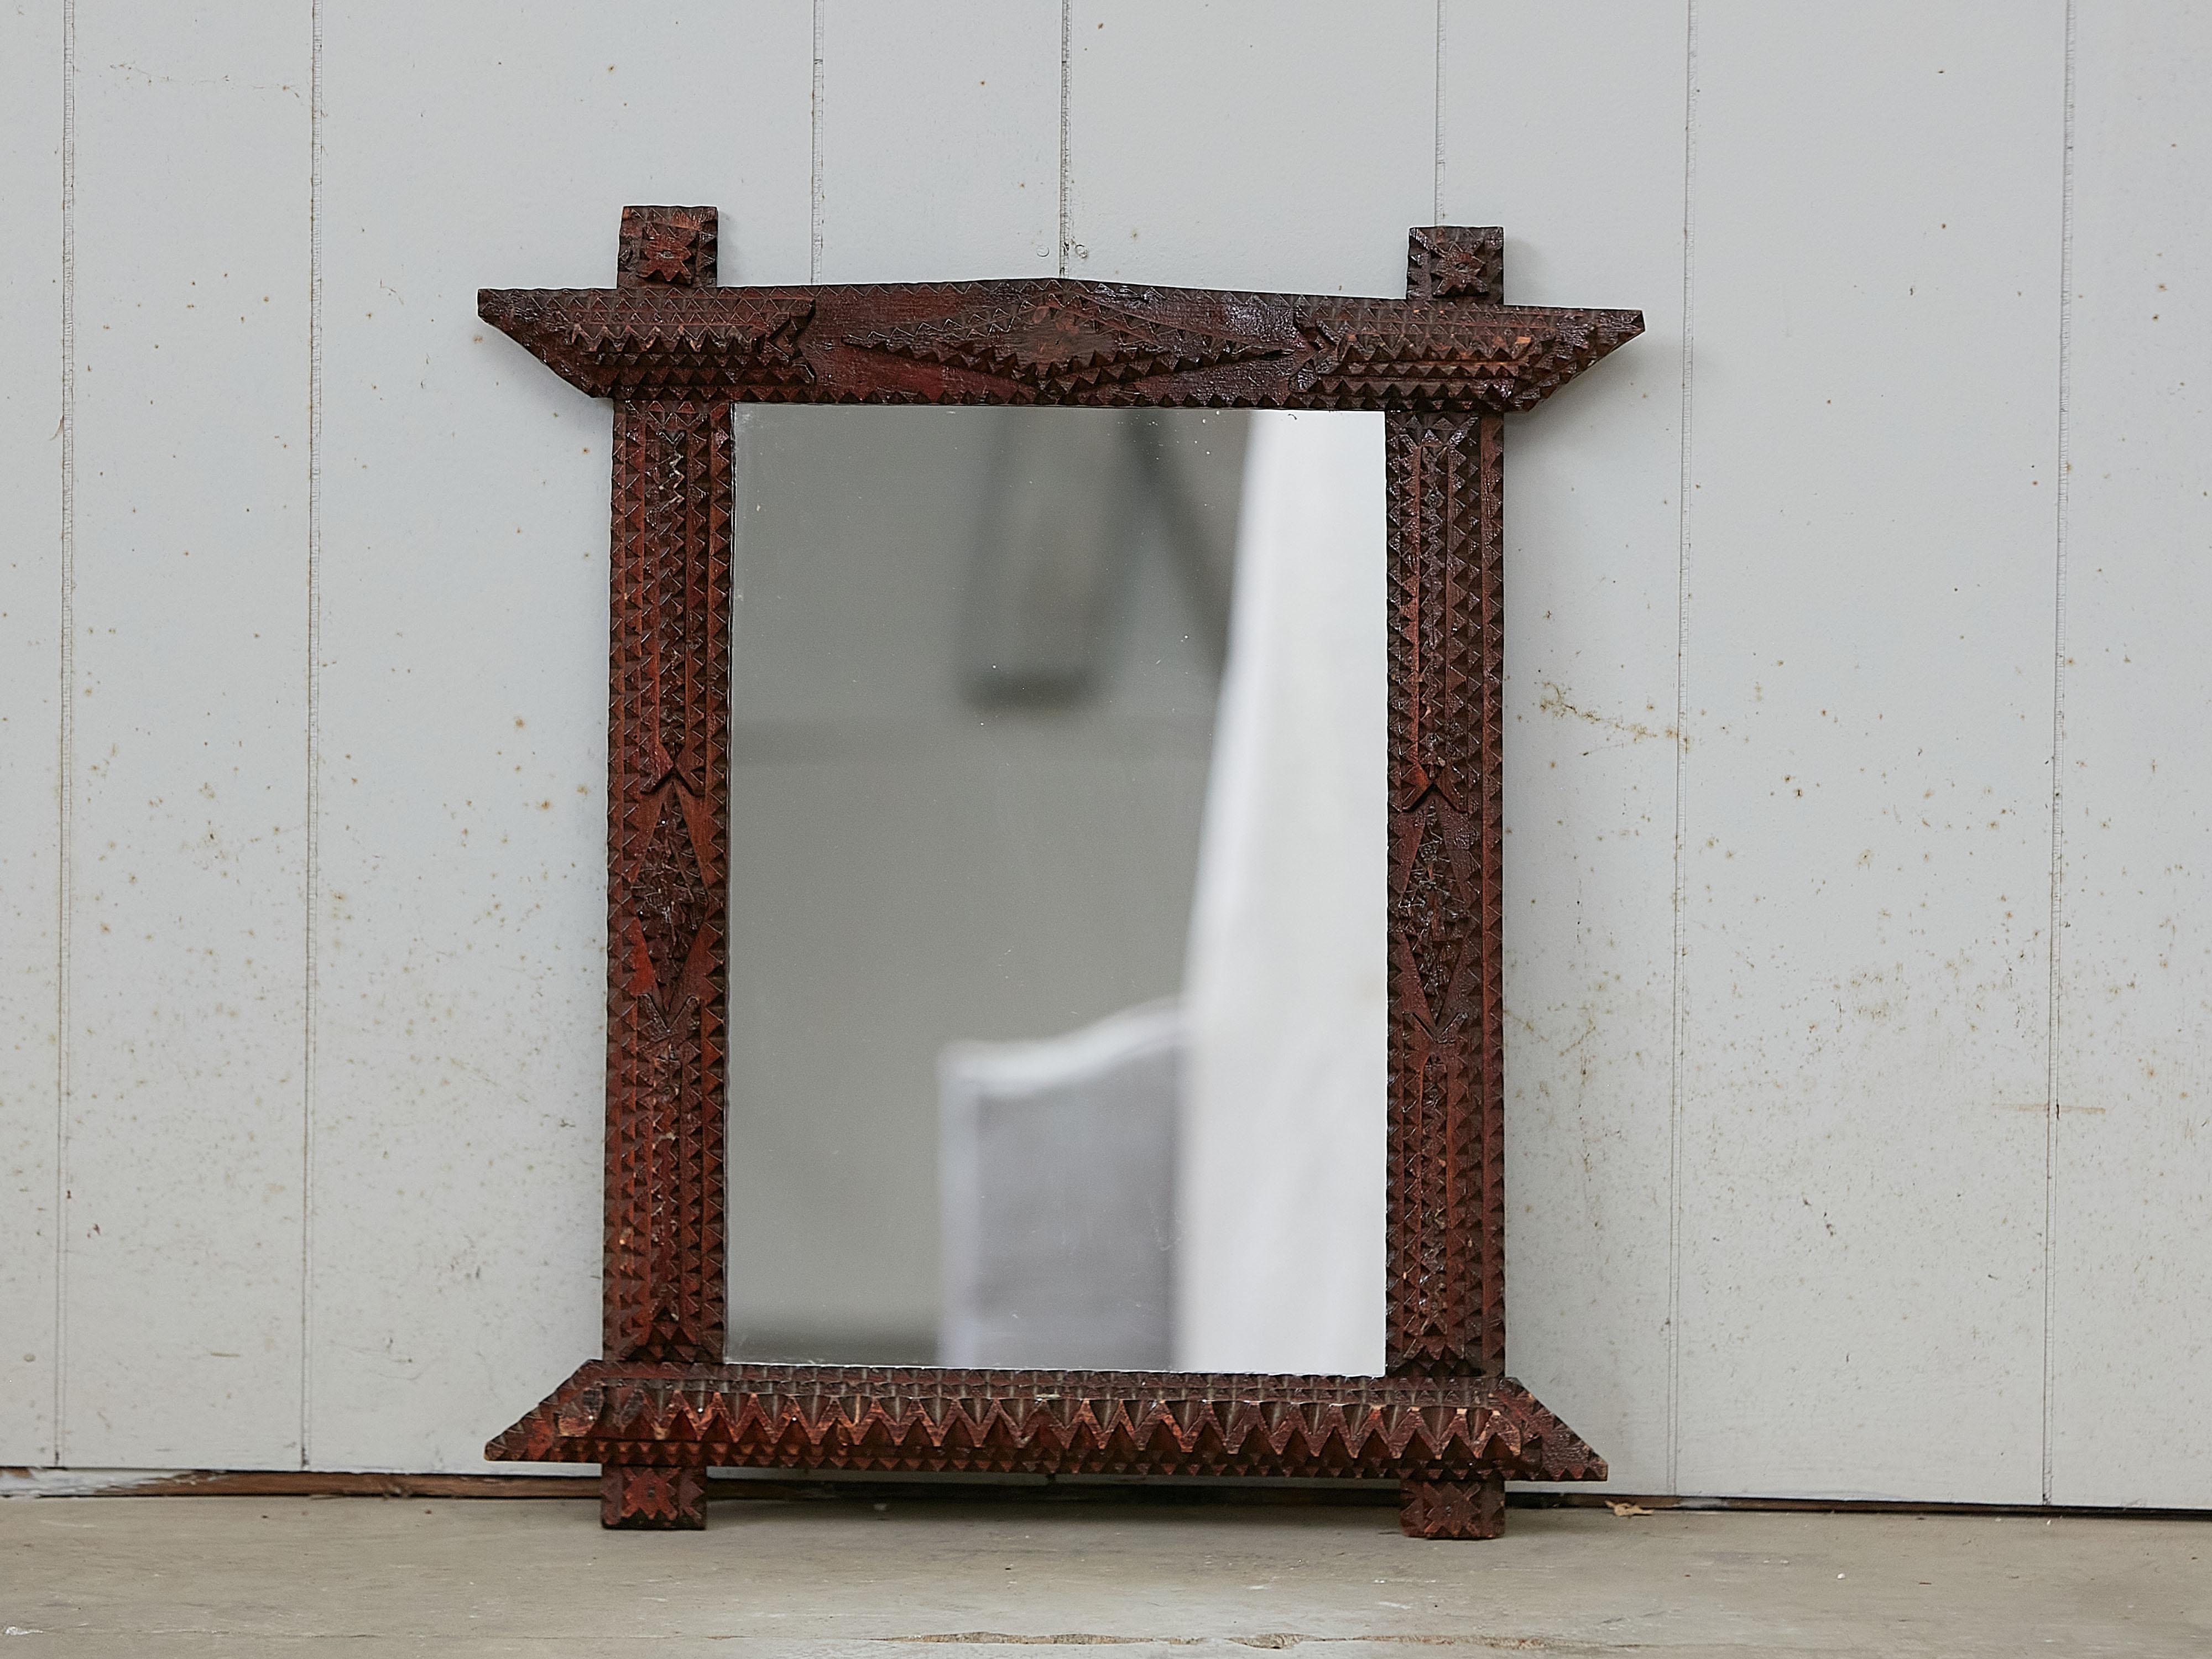 A French Tramp Art hand carved mirror from the early 20th century with raised diamond motifs. Created in France during the early years of the 20th century, this mirror was hand carved in the manner typical of the Tramp Art style. Consisting of a